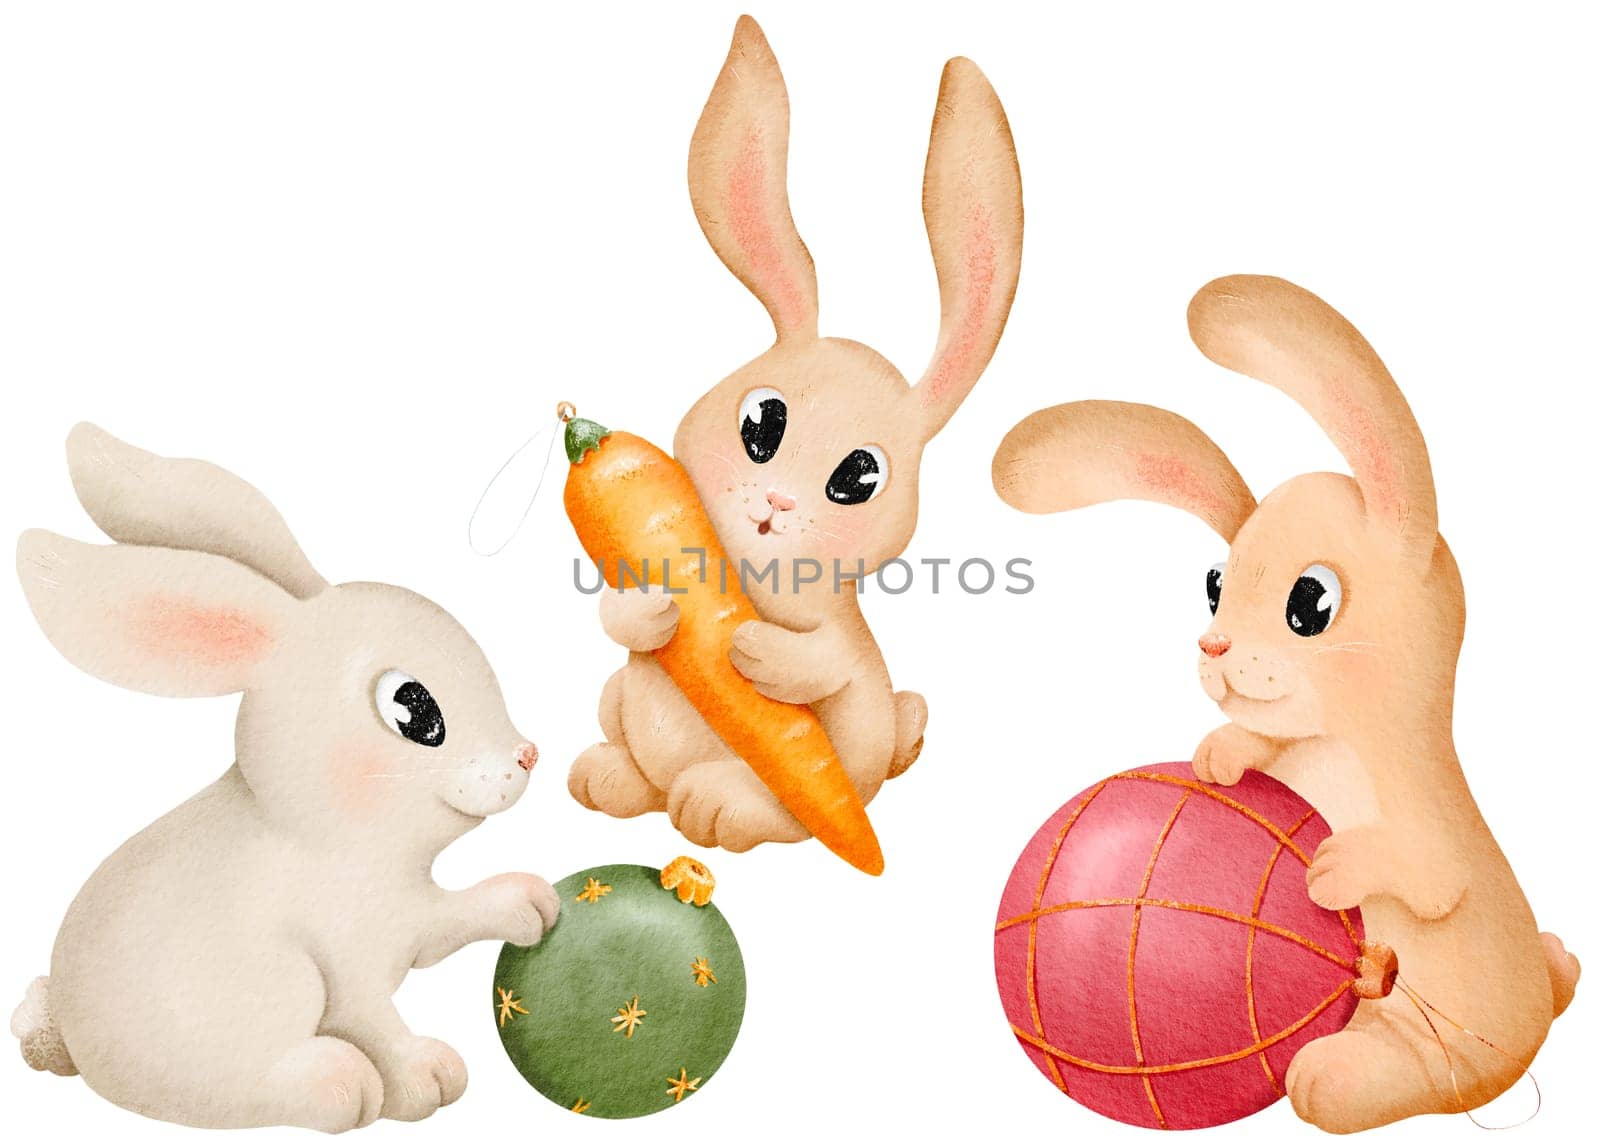 Bunny and rabbit with Christmas toys watercolor set. Hand drawn animals in different color. hare illustration element. Cute characters for Christmas, New Year. for postcards, textile, wrapping.